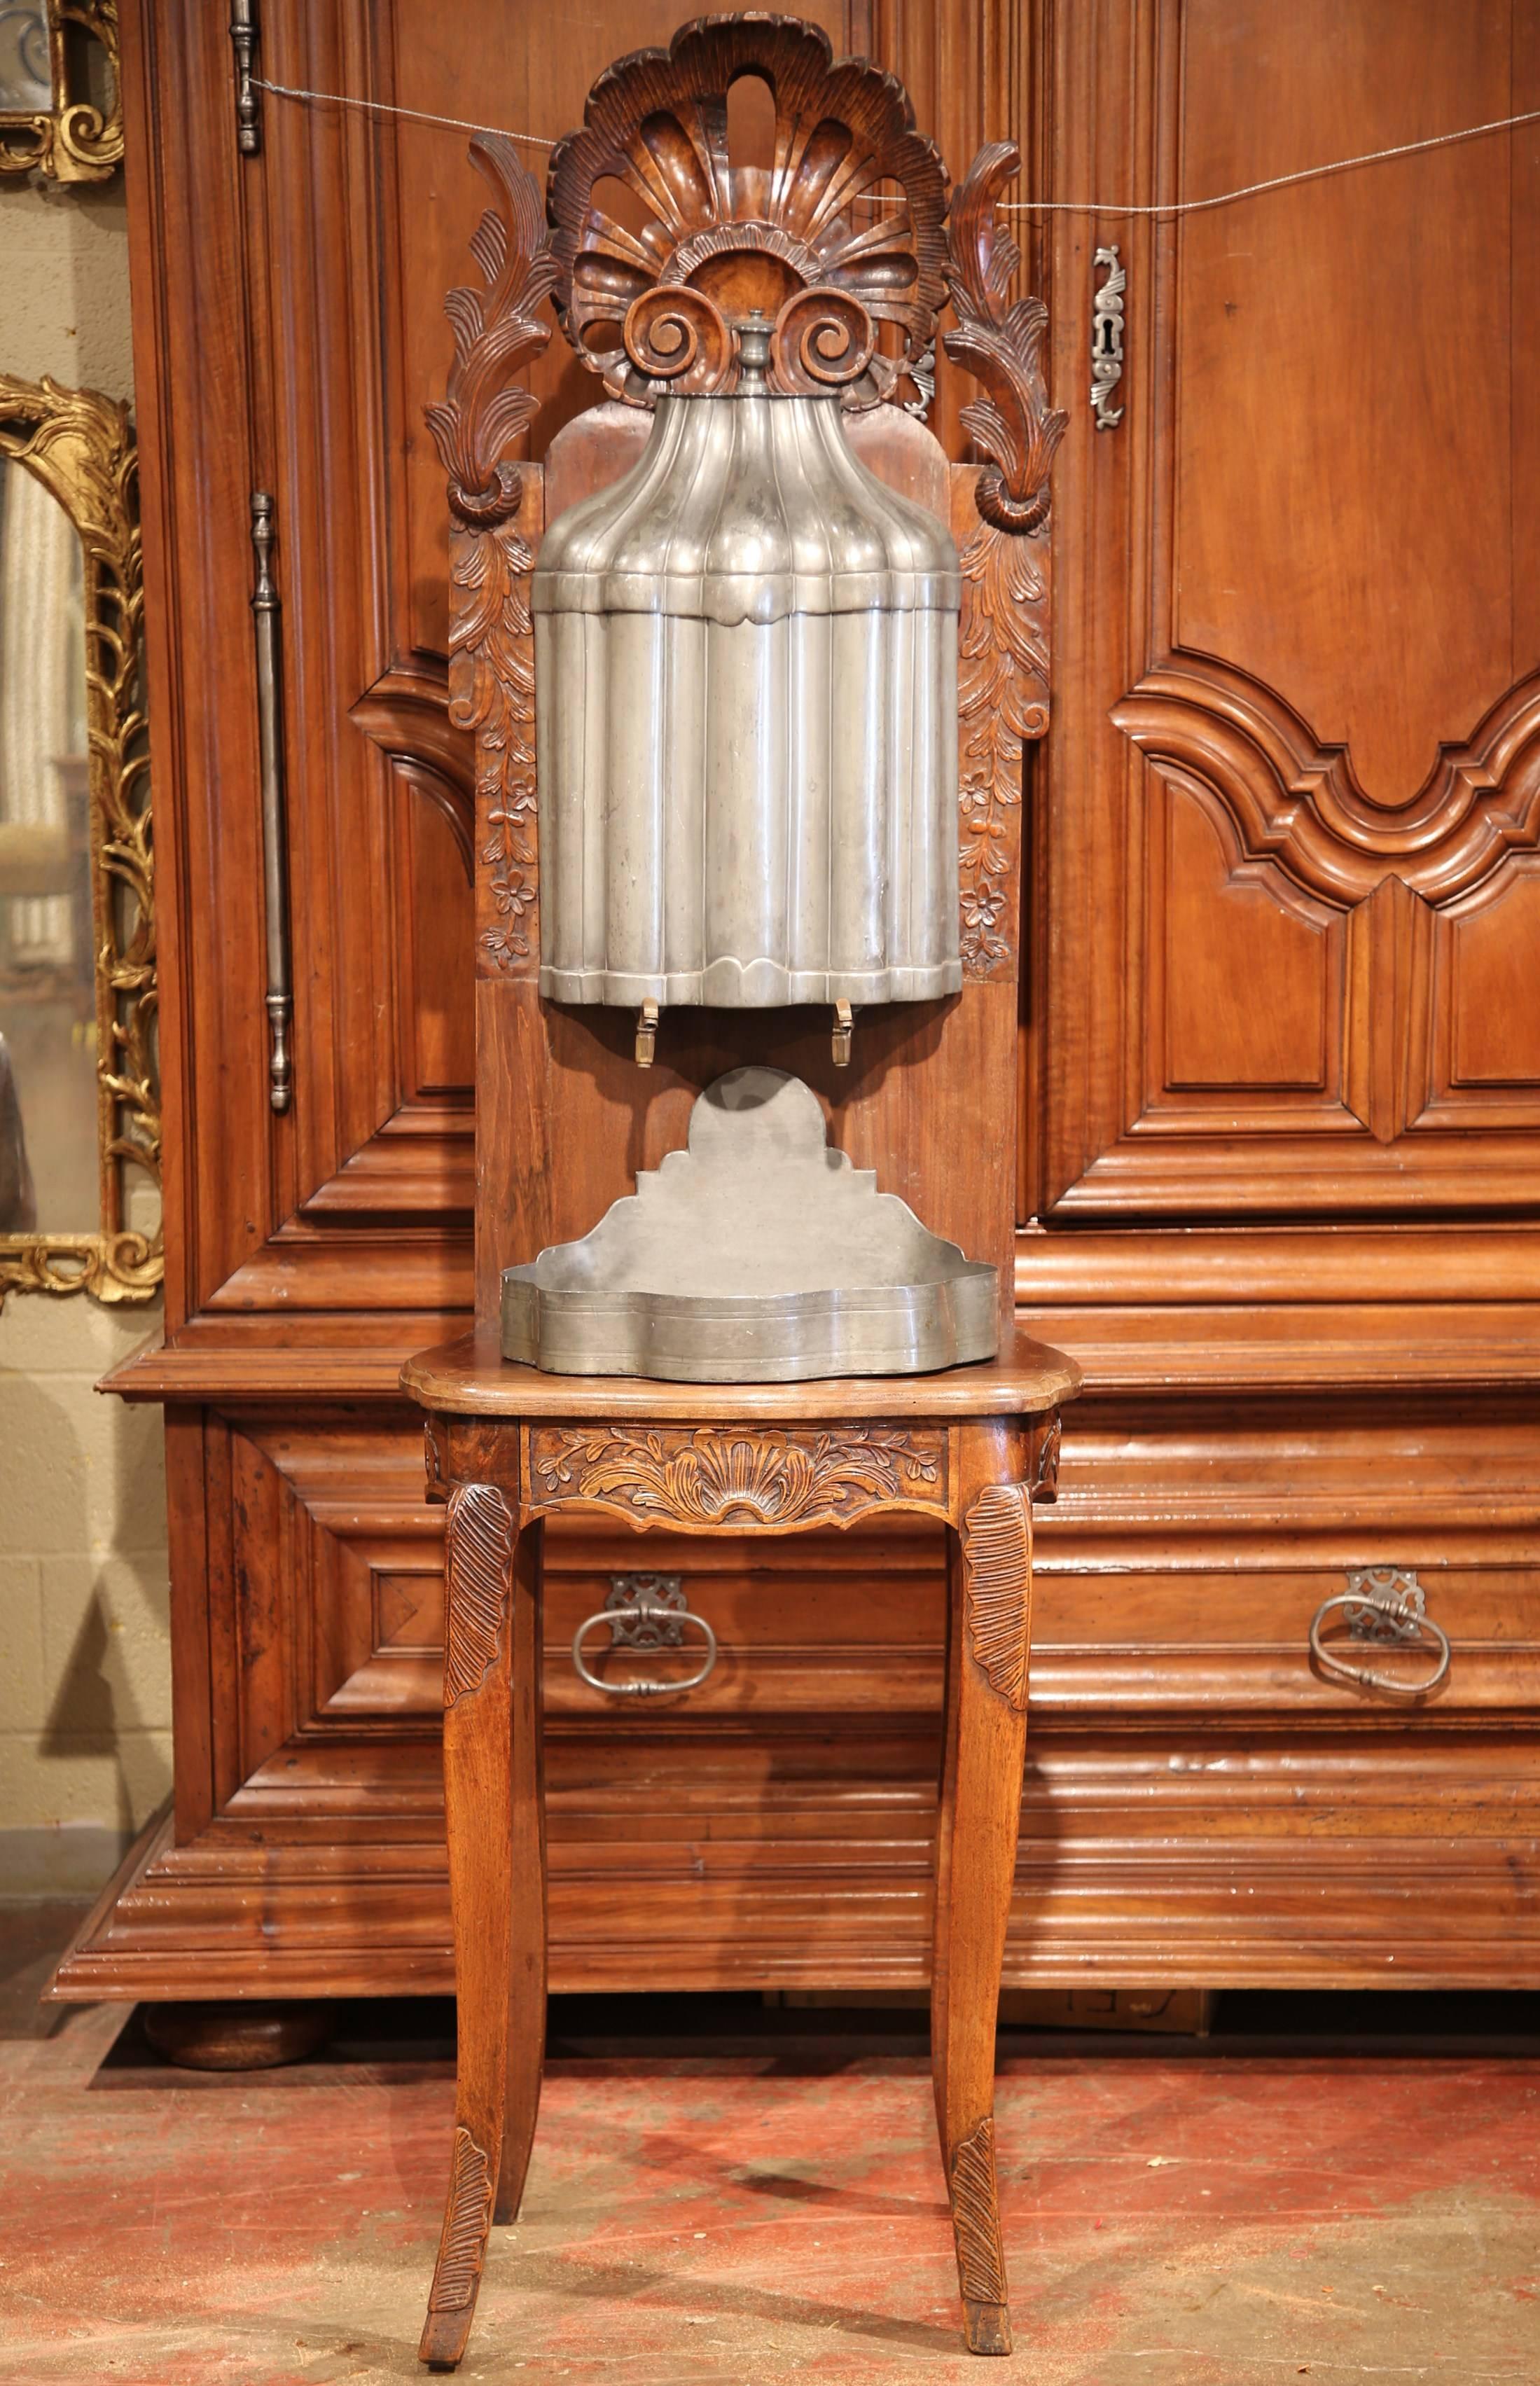 This elegant, antique fountain was crafted in Lyon, France, circa 1780. In the past, this kind of lavabos was actually used for hand washing. This water fountain is made of pewter with bronze faucets, and rests on its original carved fruitwood stand